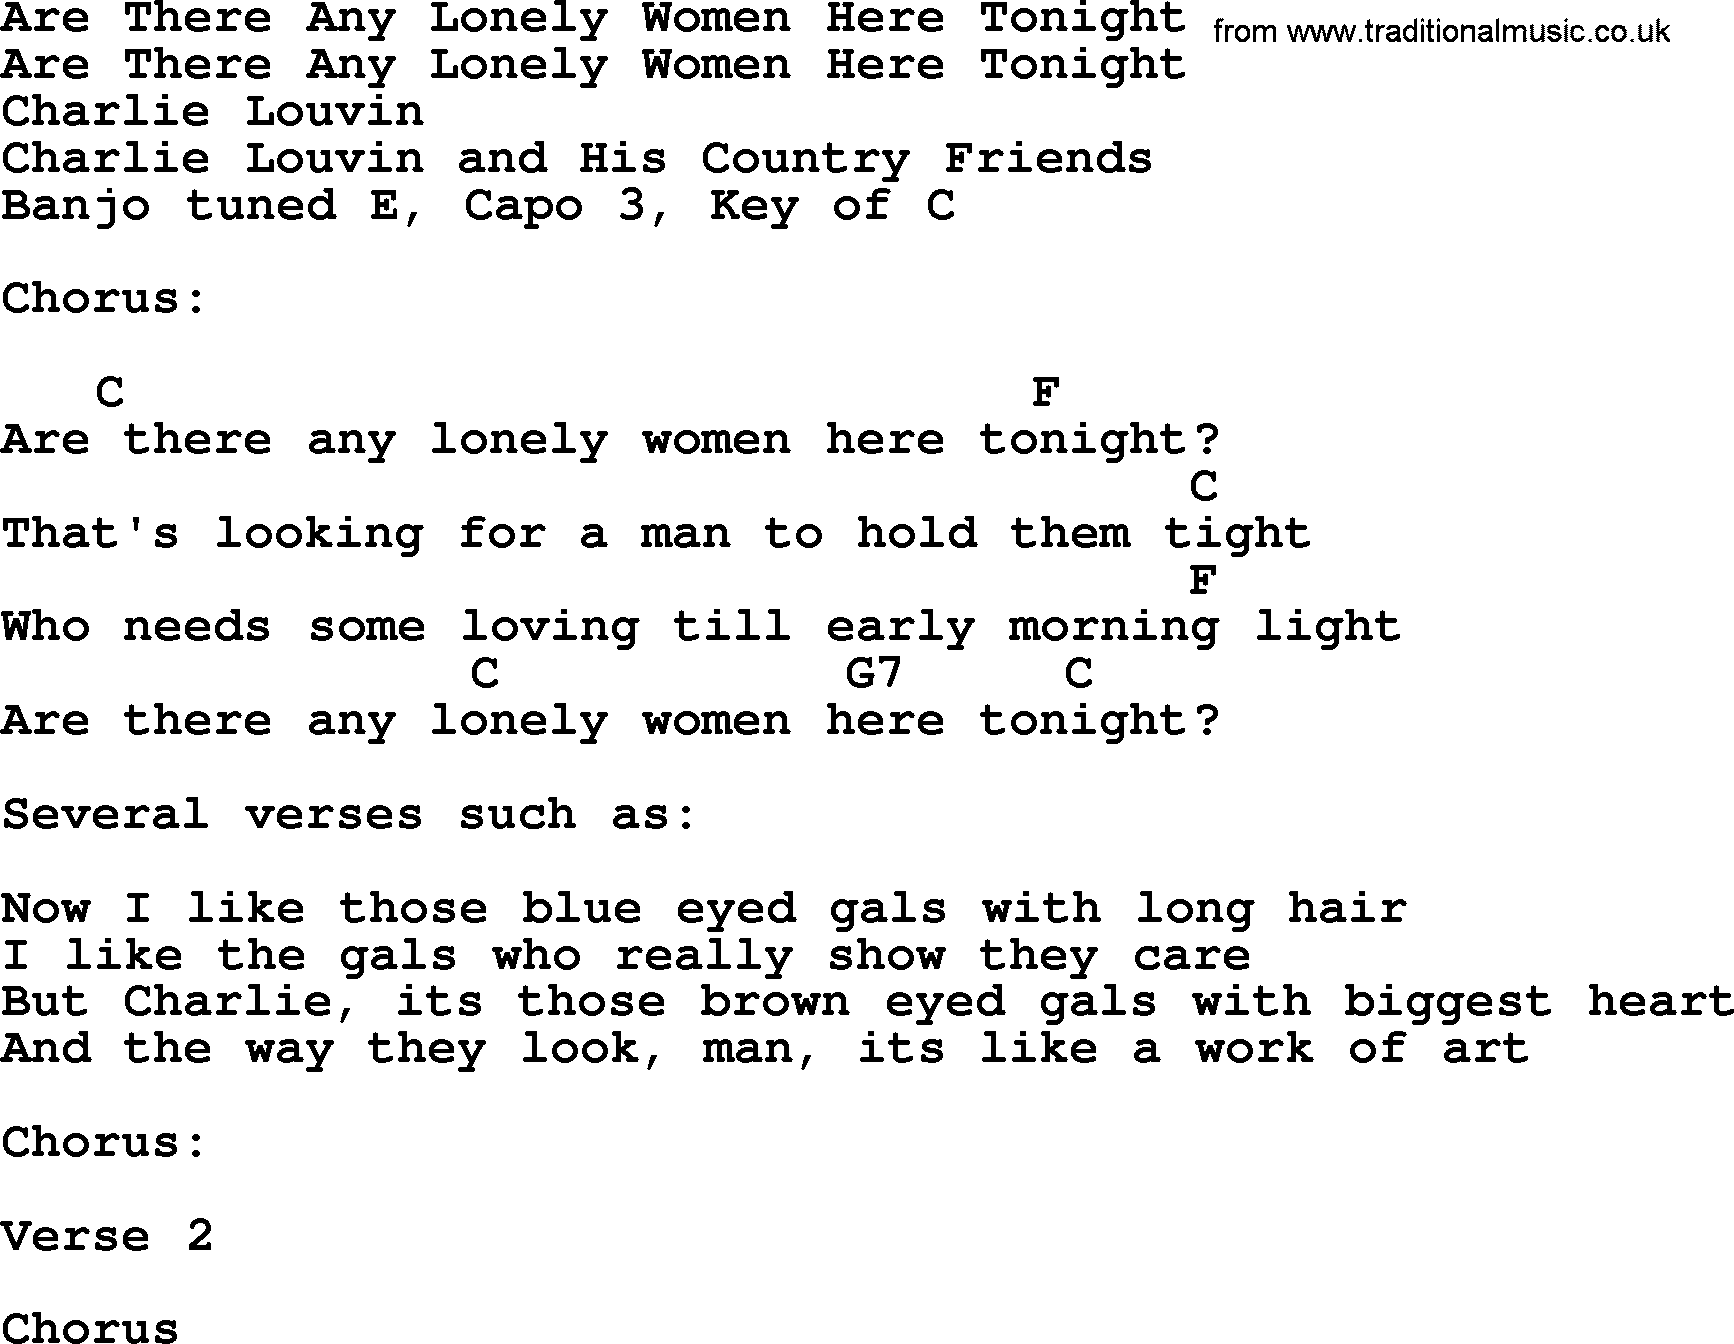 Bluegrass song: Are There Any Lonely Women Here Tonight, lyrics and chords